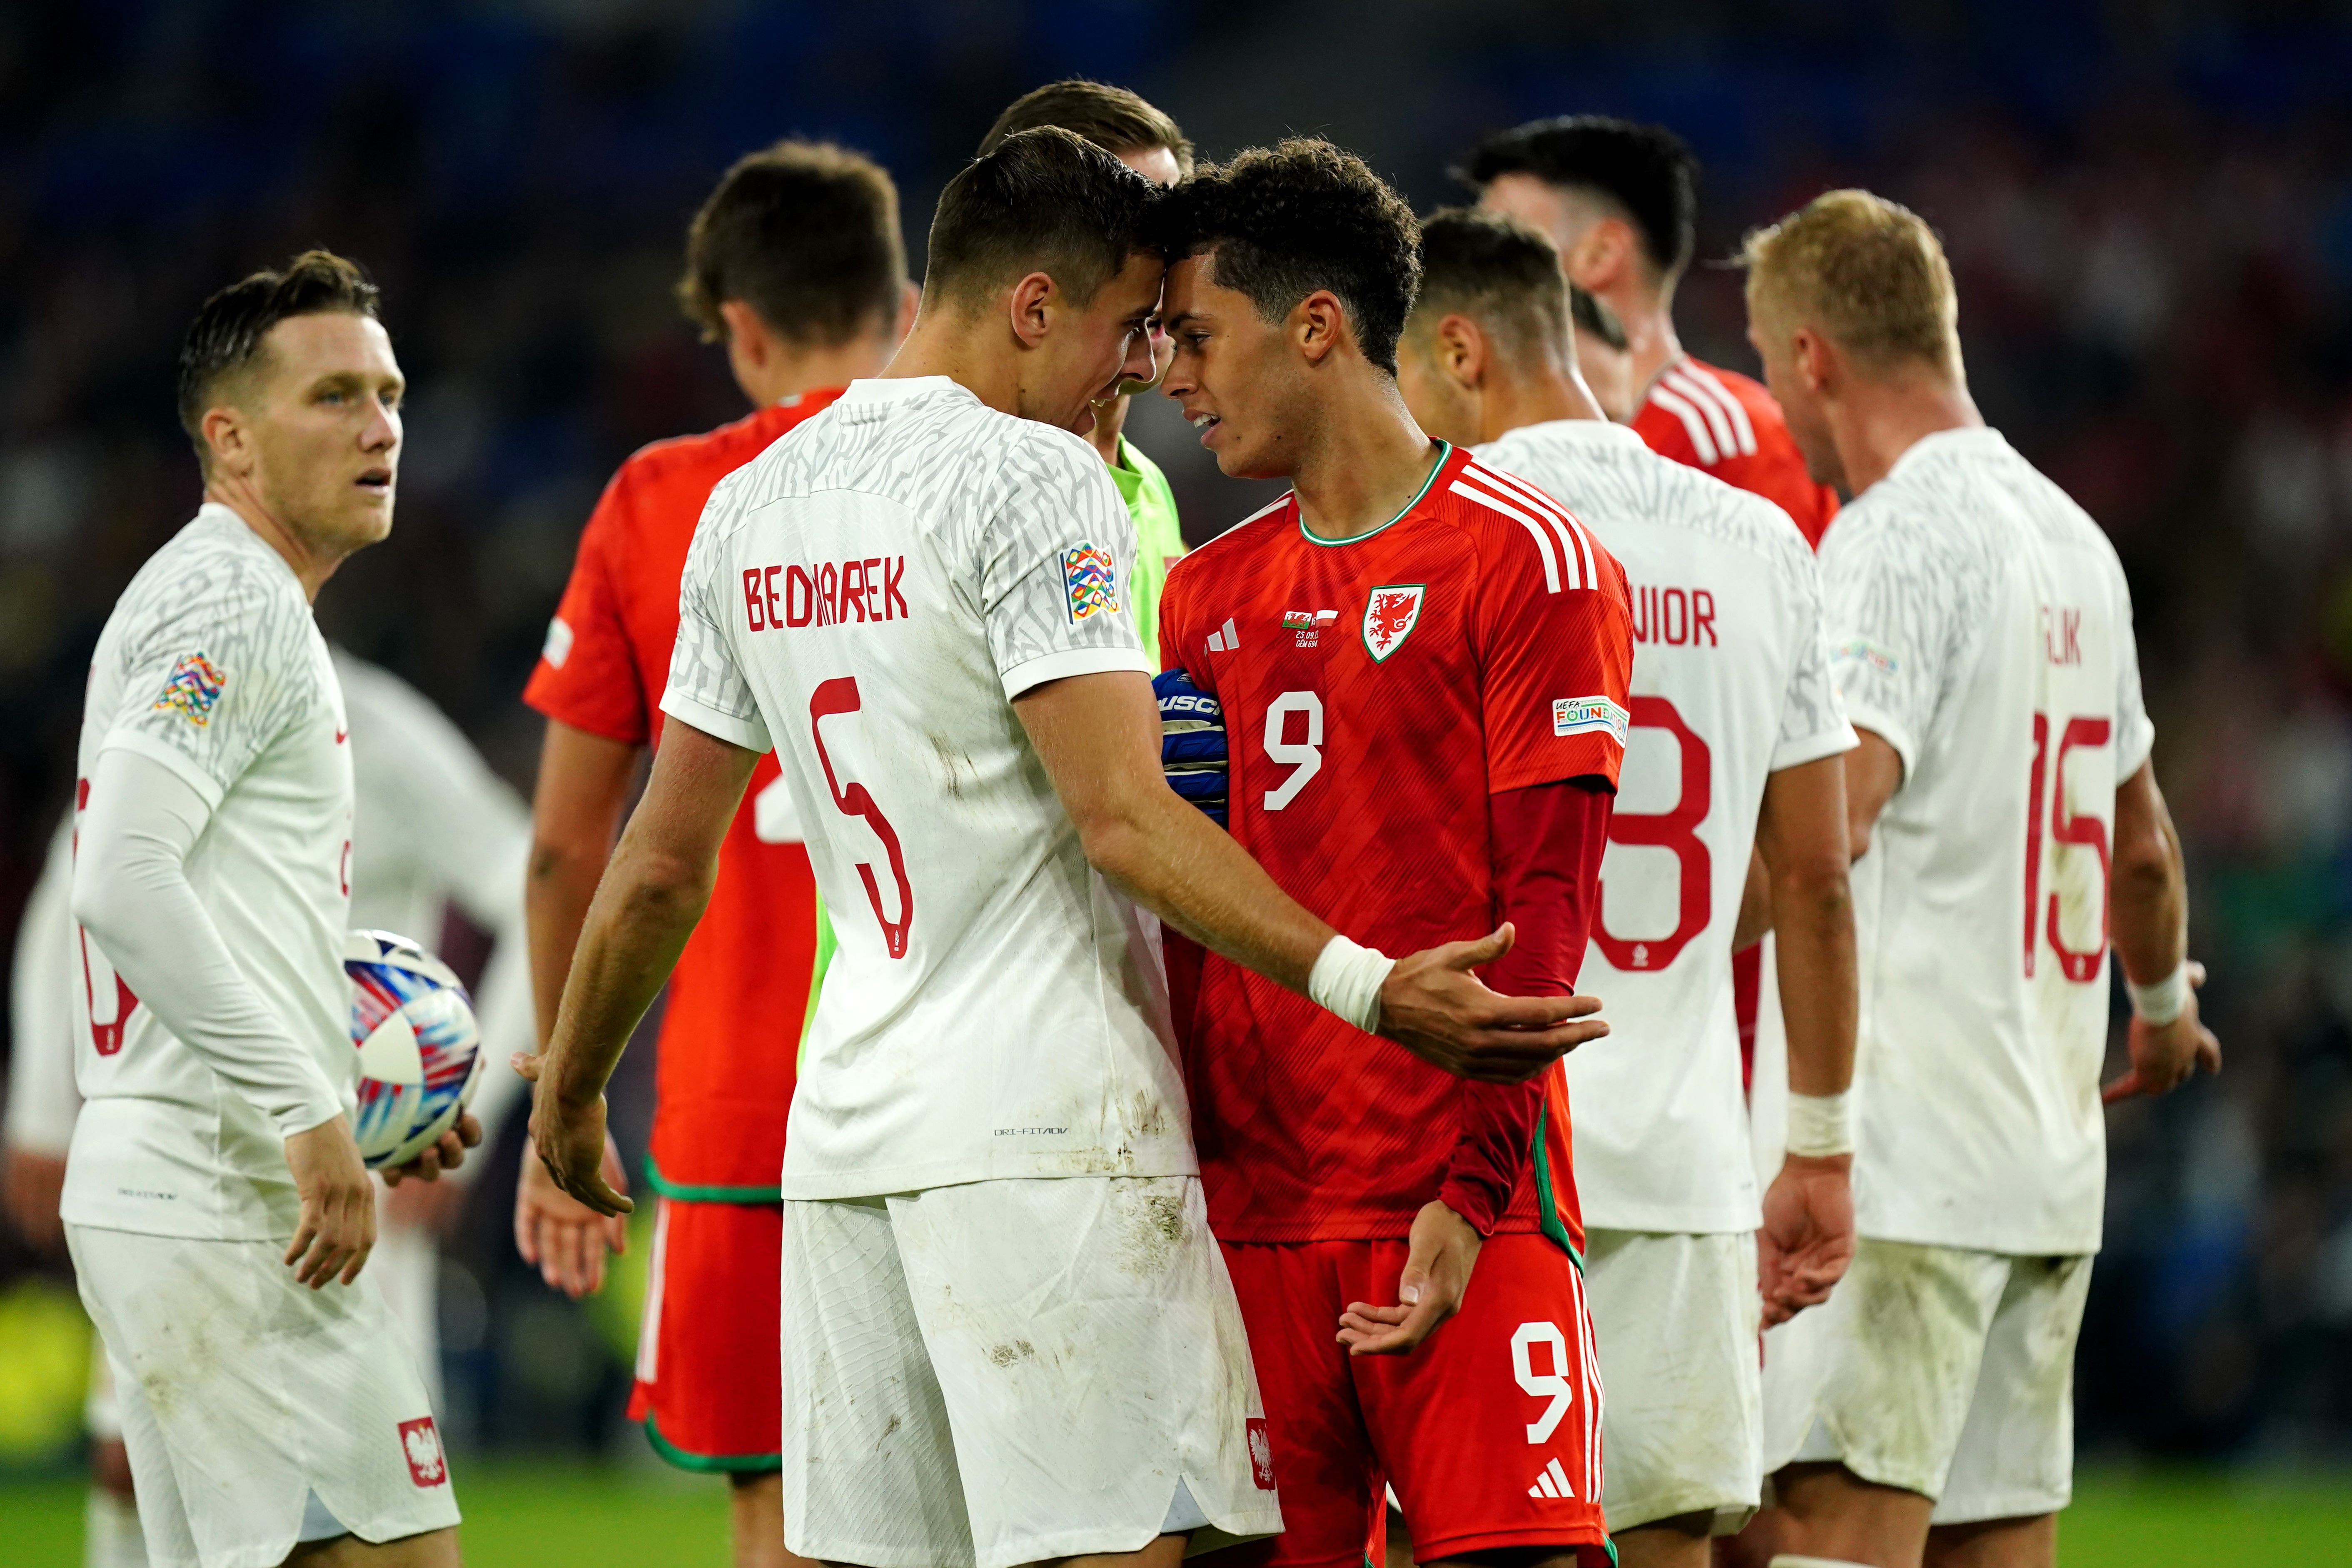 Poland defender Jan Bednarek and Wales striker Brennan Johnson go head to head in a Nations League encounter at Cardiff in September 2022 (Mike Egerton/PA)